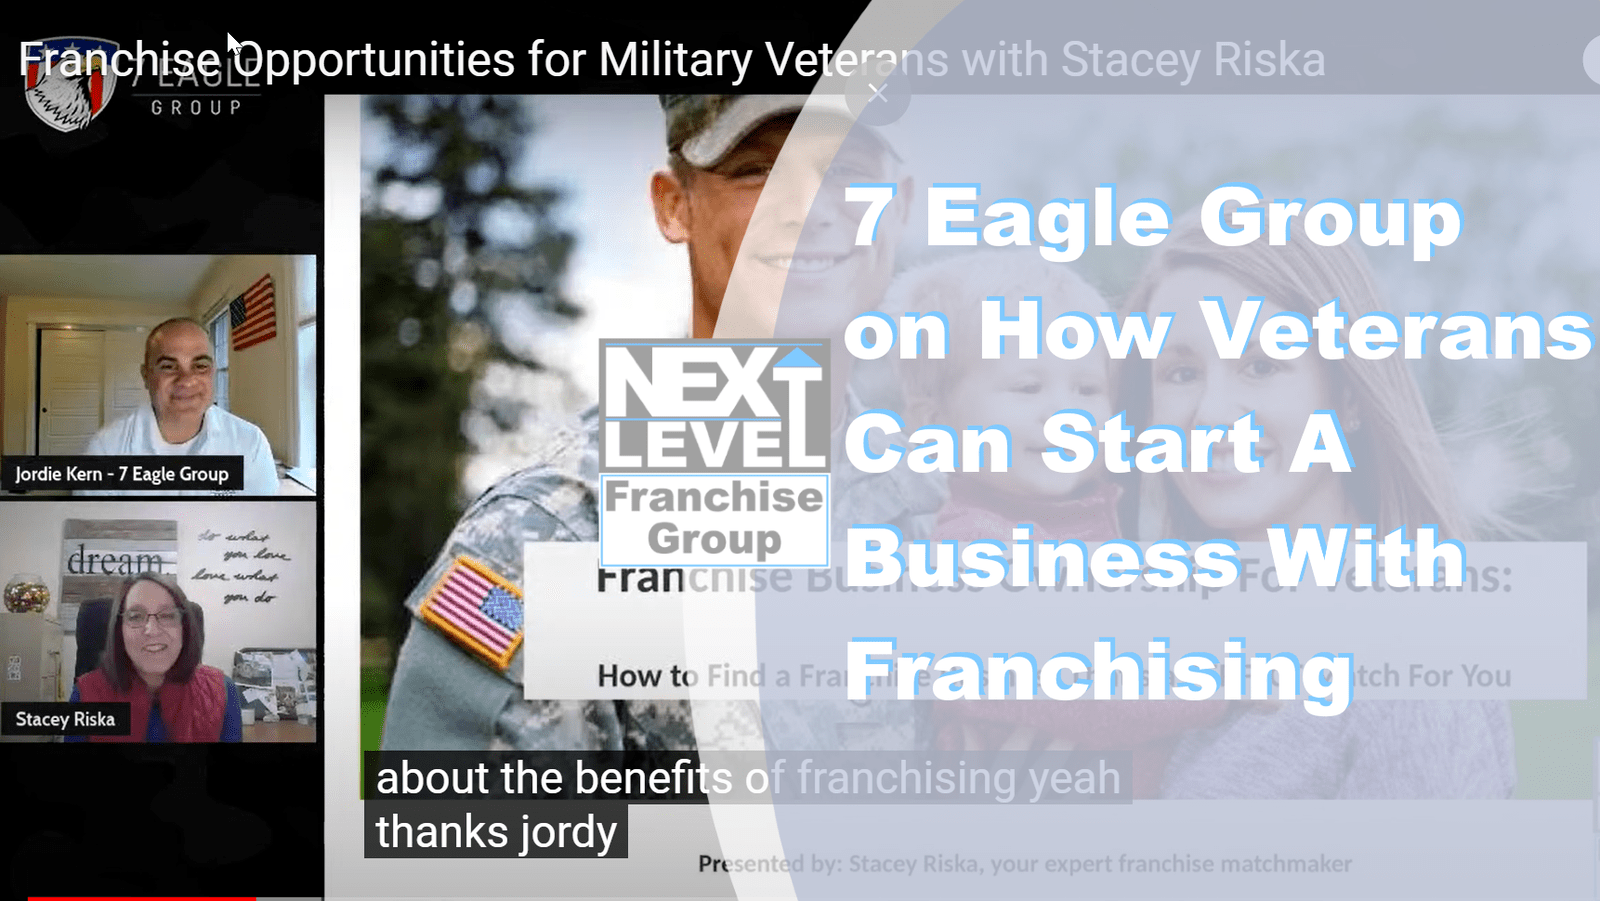 7 Eagle Group on How Veterans Can Start A Business With Franchising